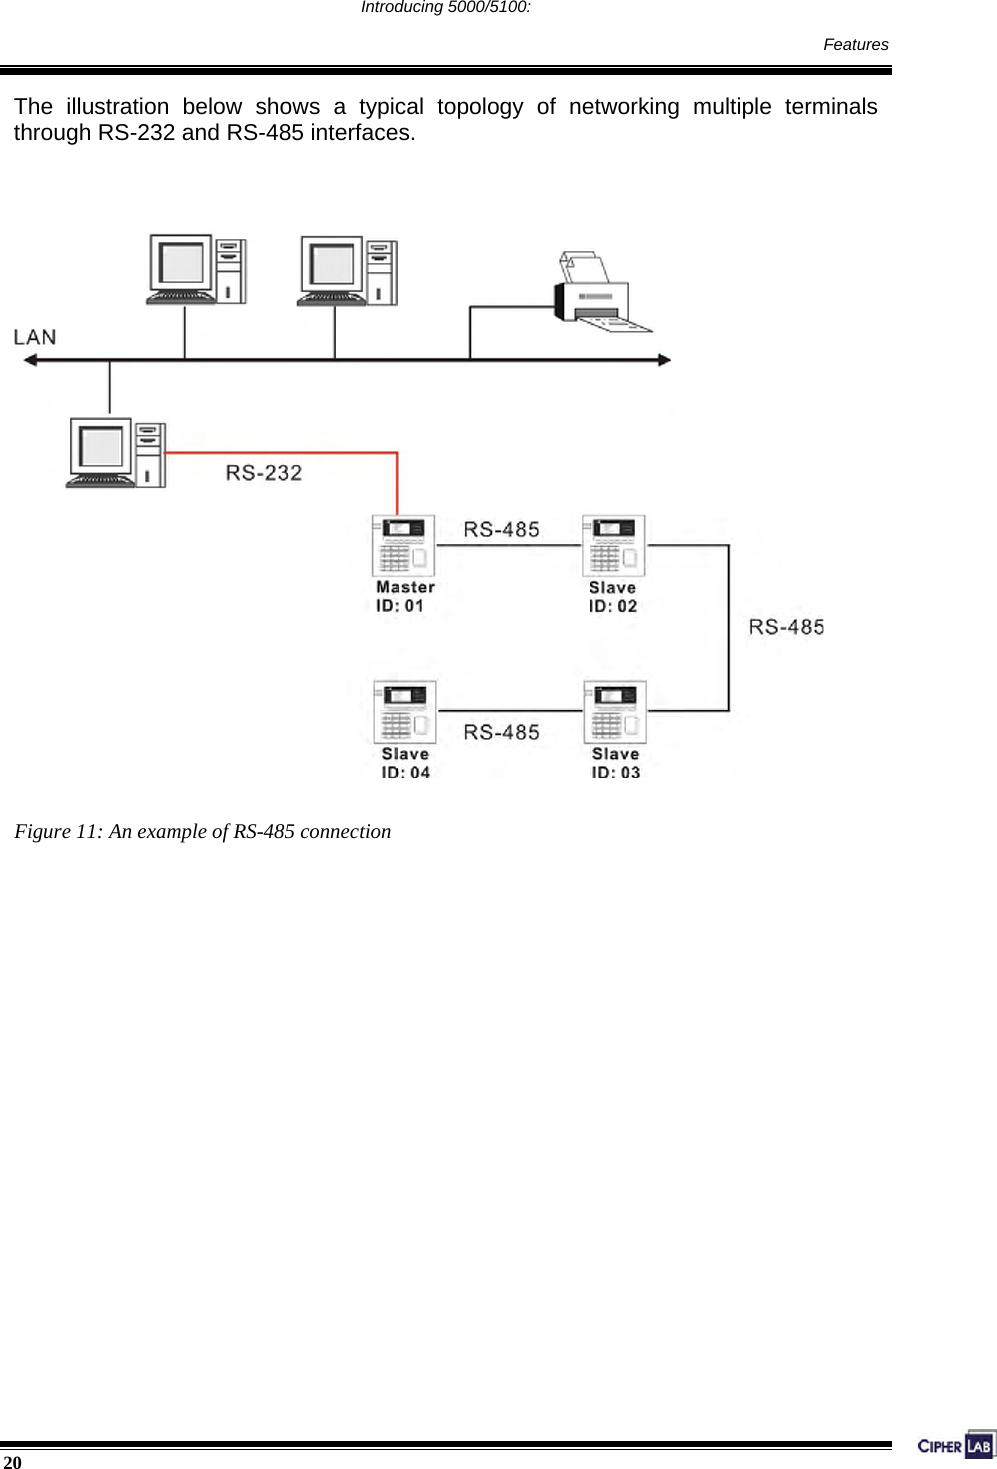  20                                                                                     Introducing 5000/5100:     Features  The illustration below shows a typical topology of networking multiple terminals through RS-232 and RS-485 interfaces.         Figure 11: An example of RS-485 connection 